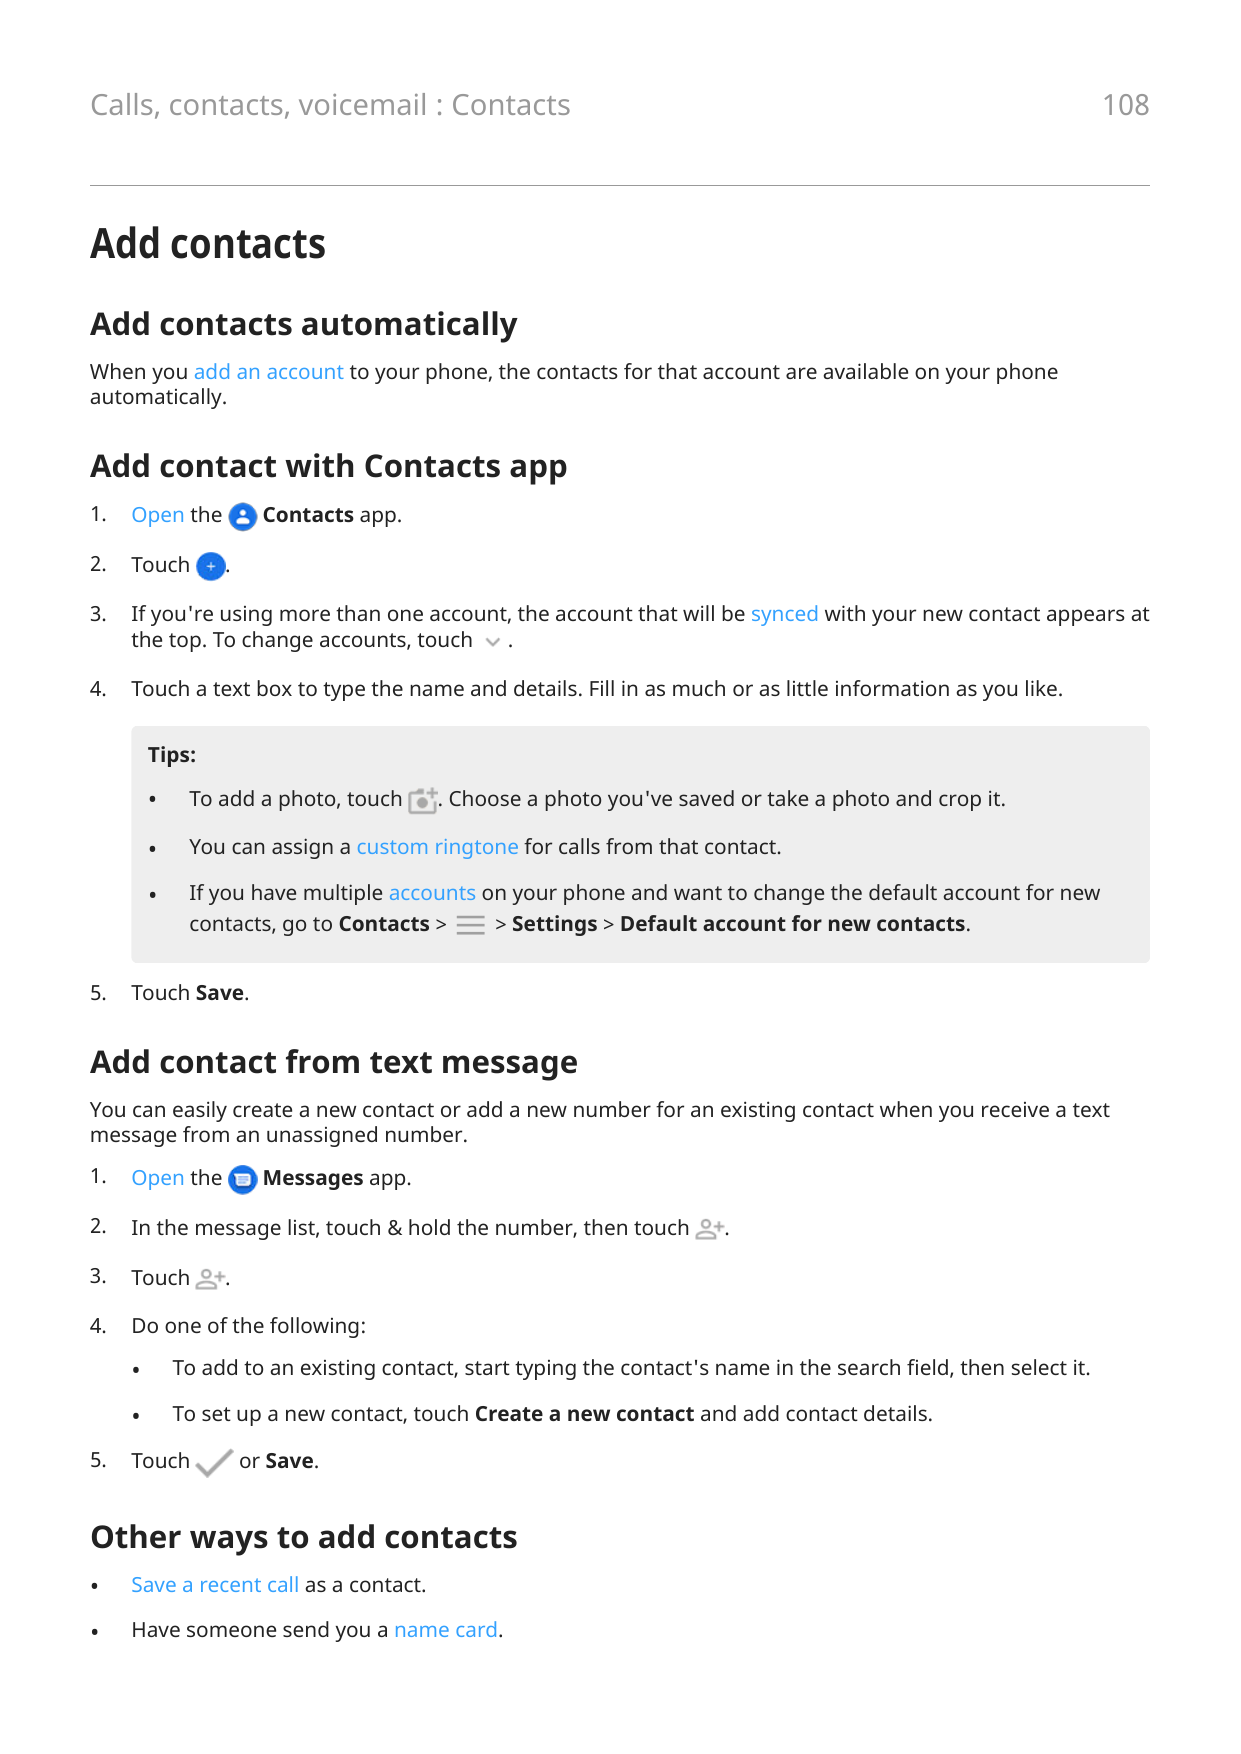 108Calls, contacts, voicemail : ContactsAdd contactsAdd contacts automaticallyWhen you add an account to your phone, the contact